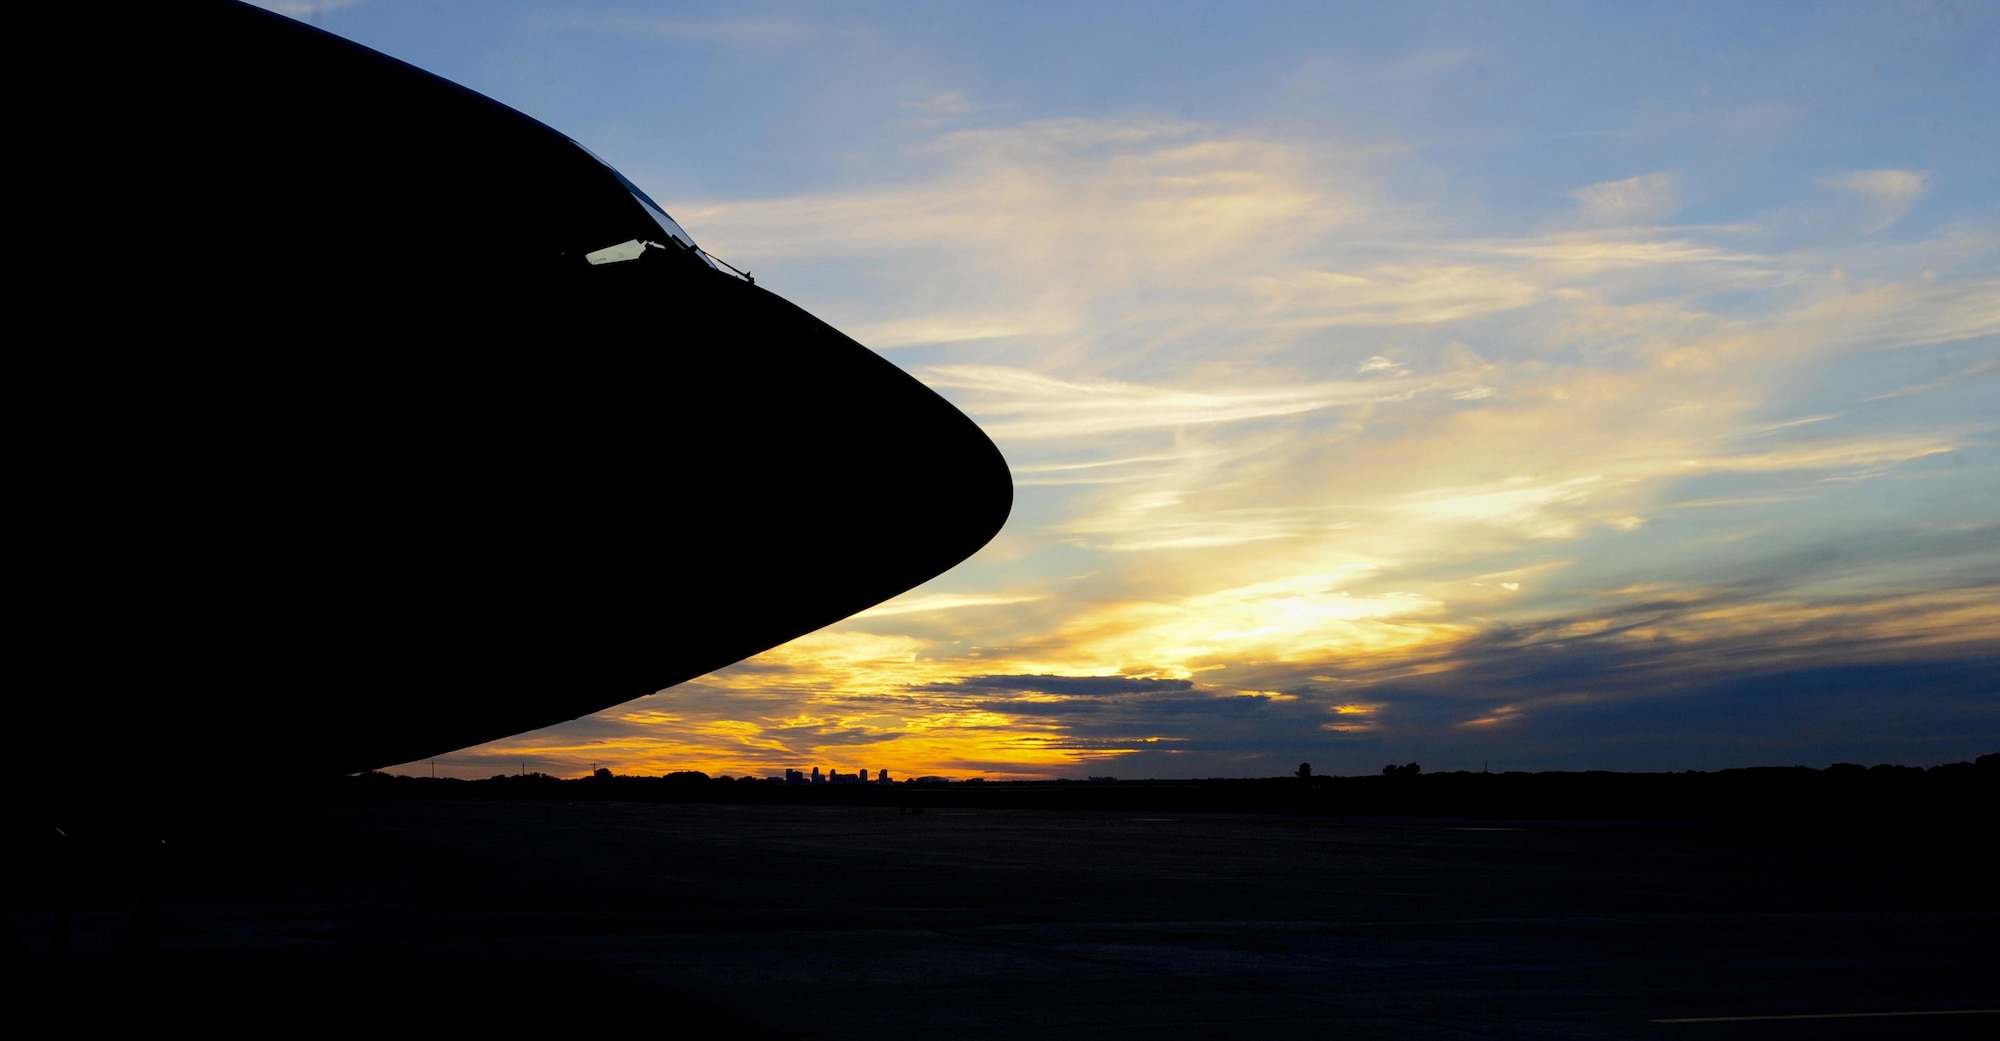 A KC-135 Stratotanker sits on the flightline at MacDill Air Force Base, Fla., as the sun sets over St. Petersburg, Fla., Jan. 12, 2016. The 16 KC-135s currently assigned to MacDill AFB provide aerial refueling to nine combatant commands. (U.S. Air force photo/Airman 1st Class Mariette M. Adams)